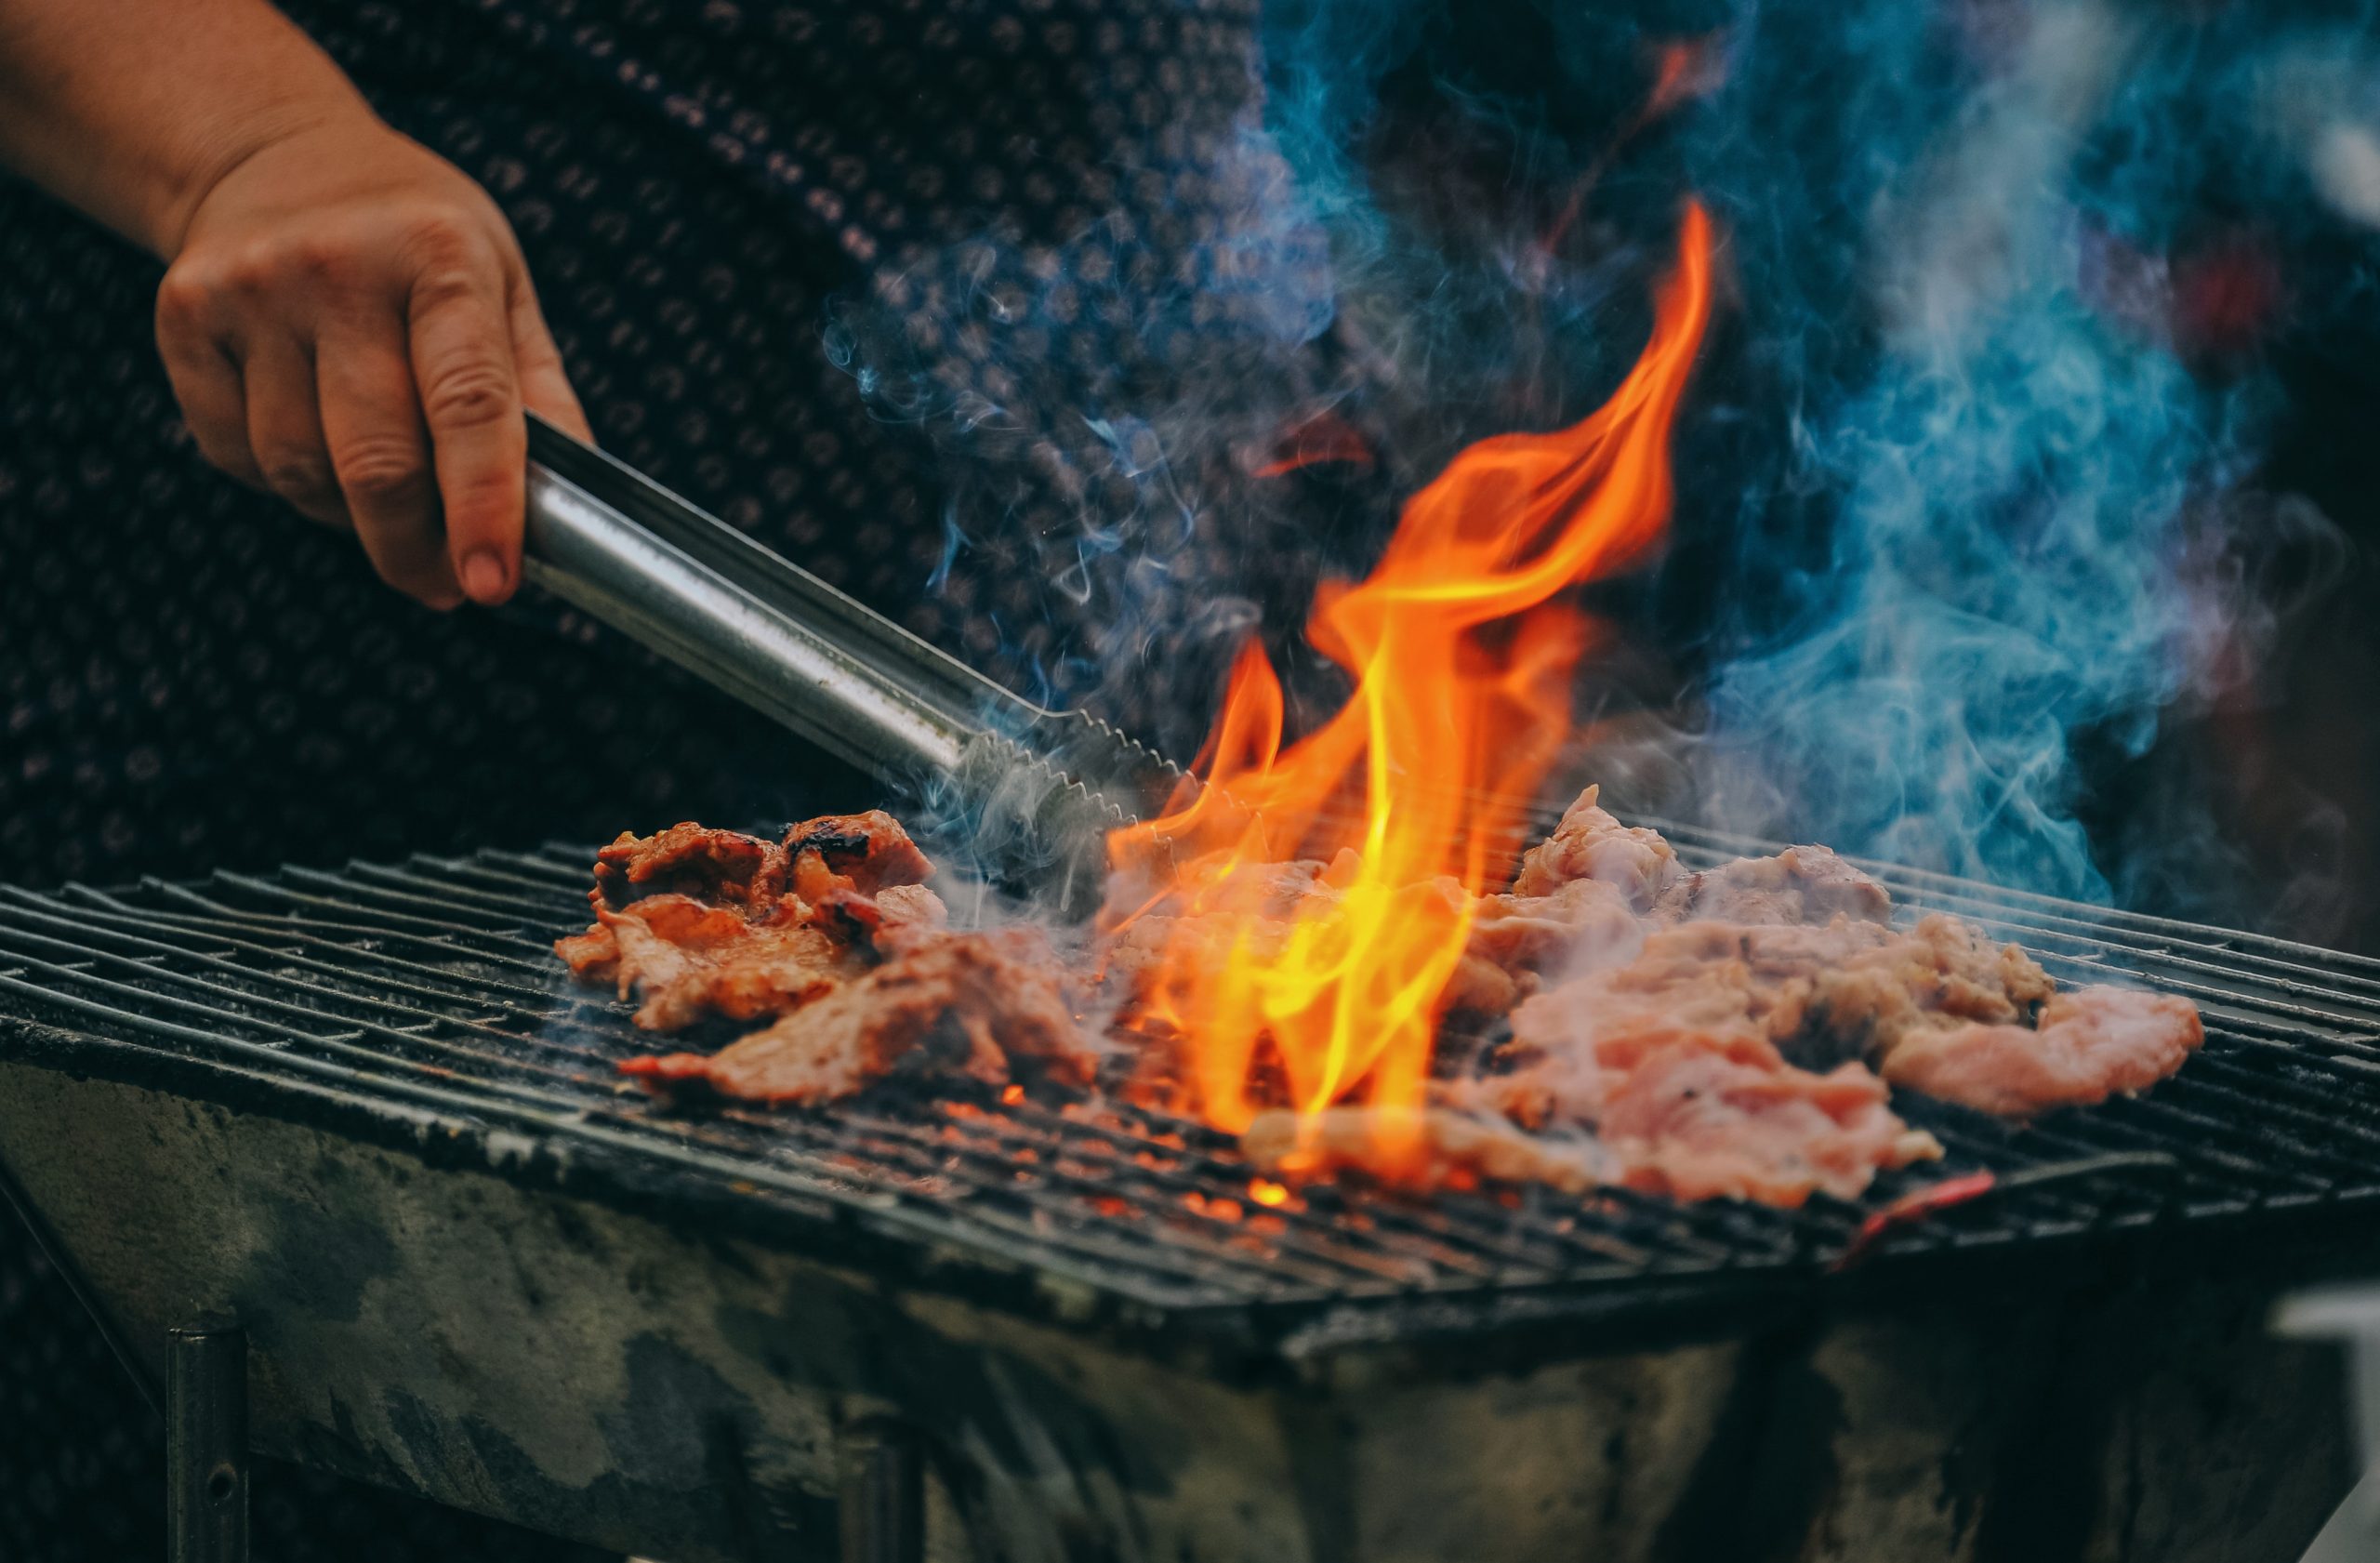 Barbeque Captions and Quotes for Instagram